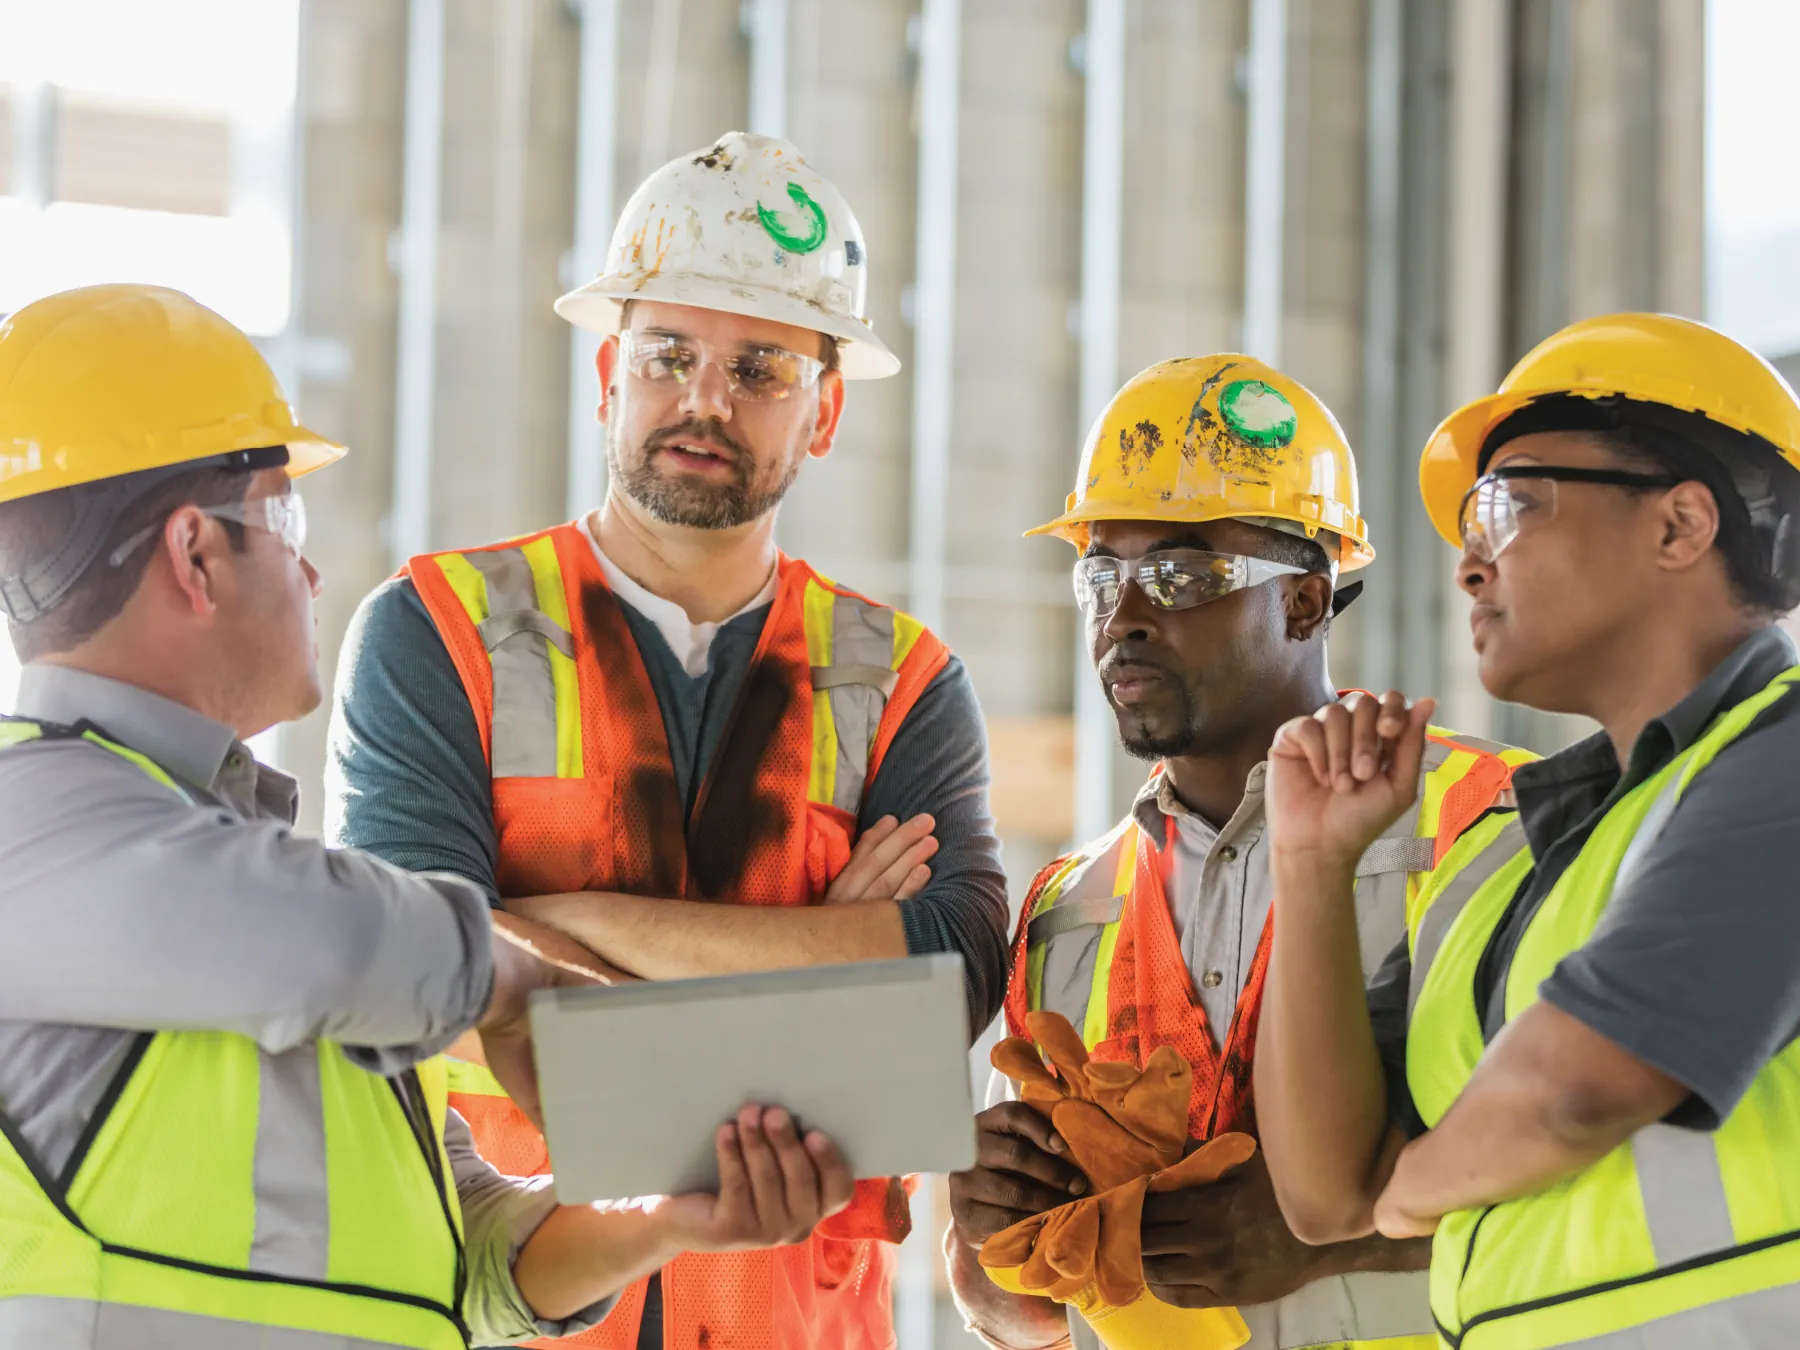 Coordination and communication among diverse project teams on a construction site